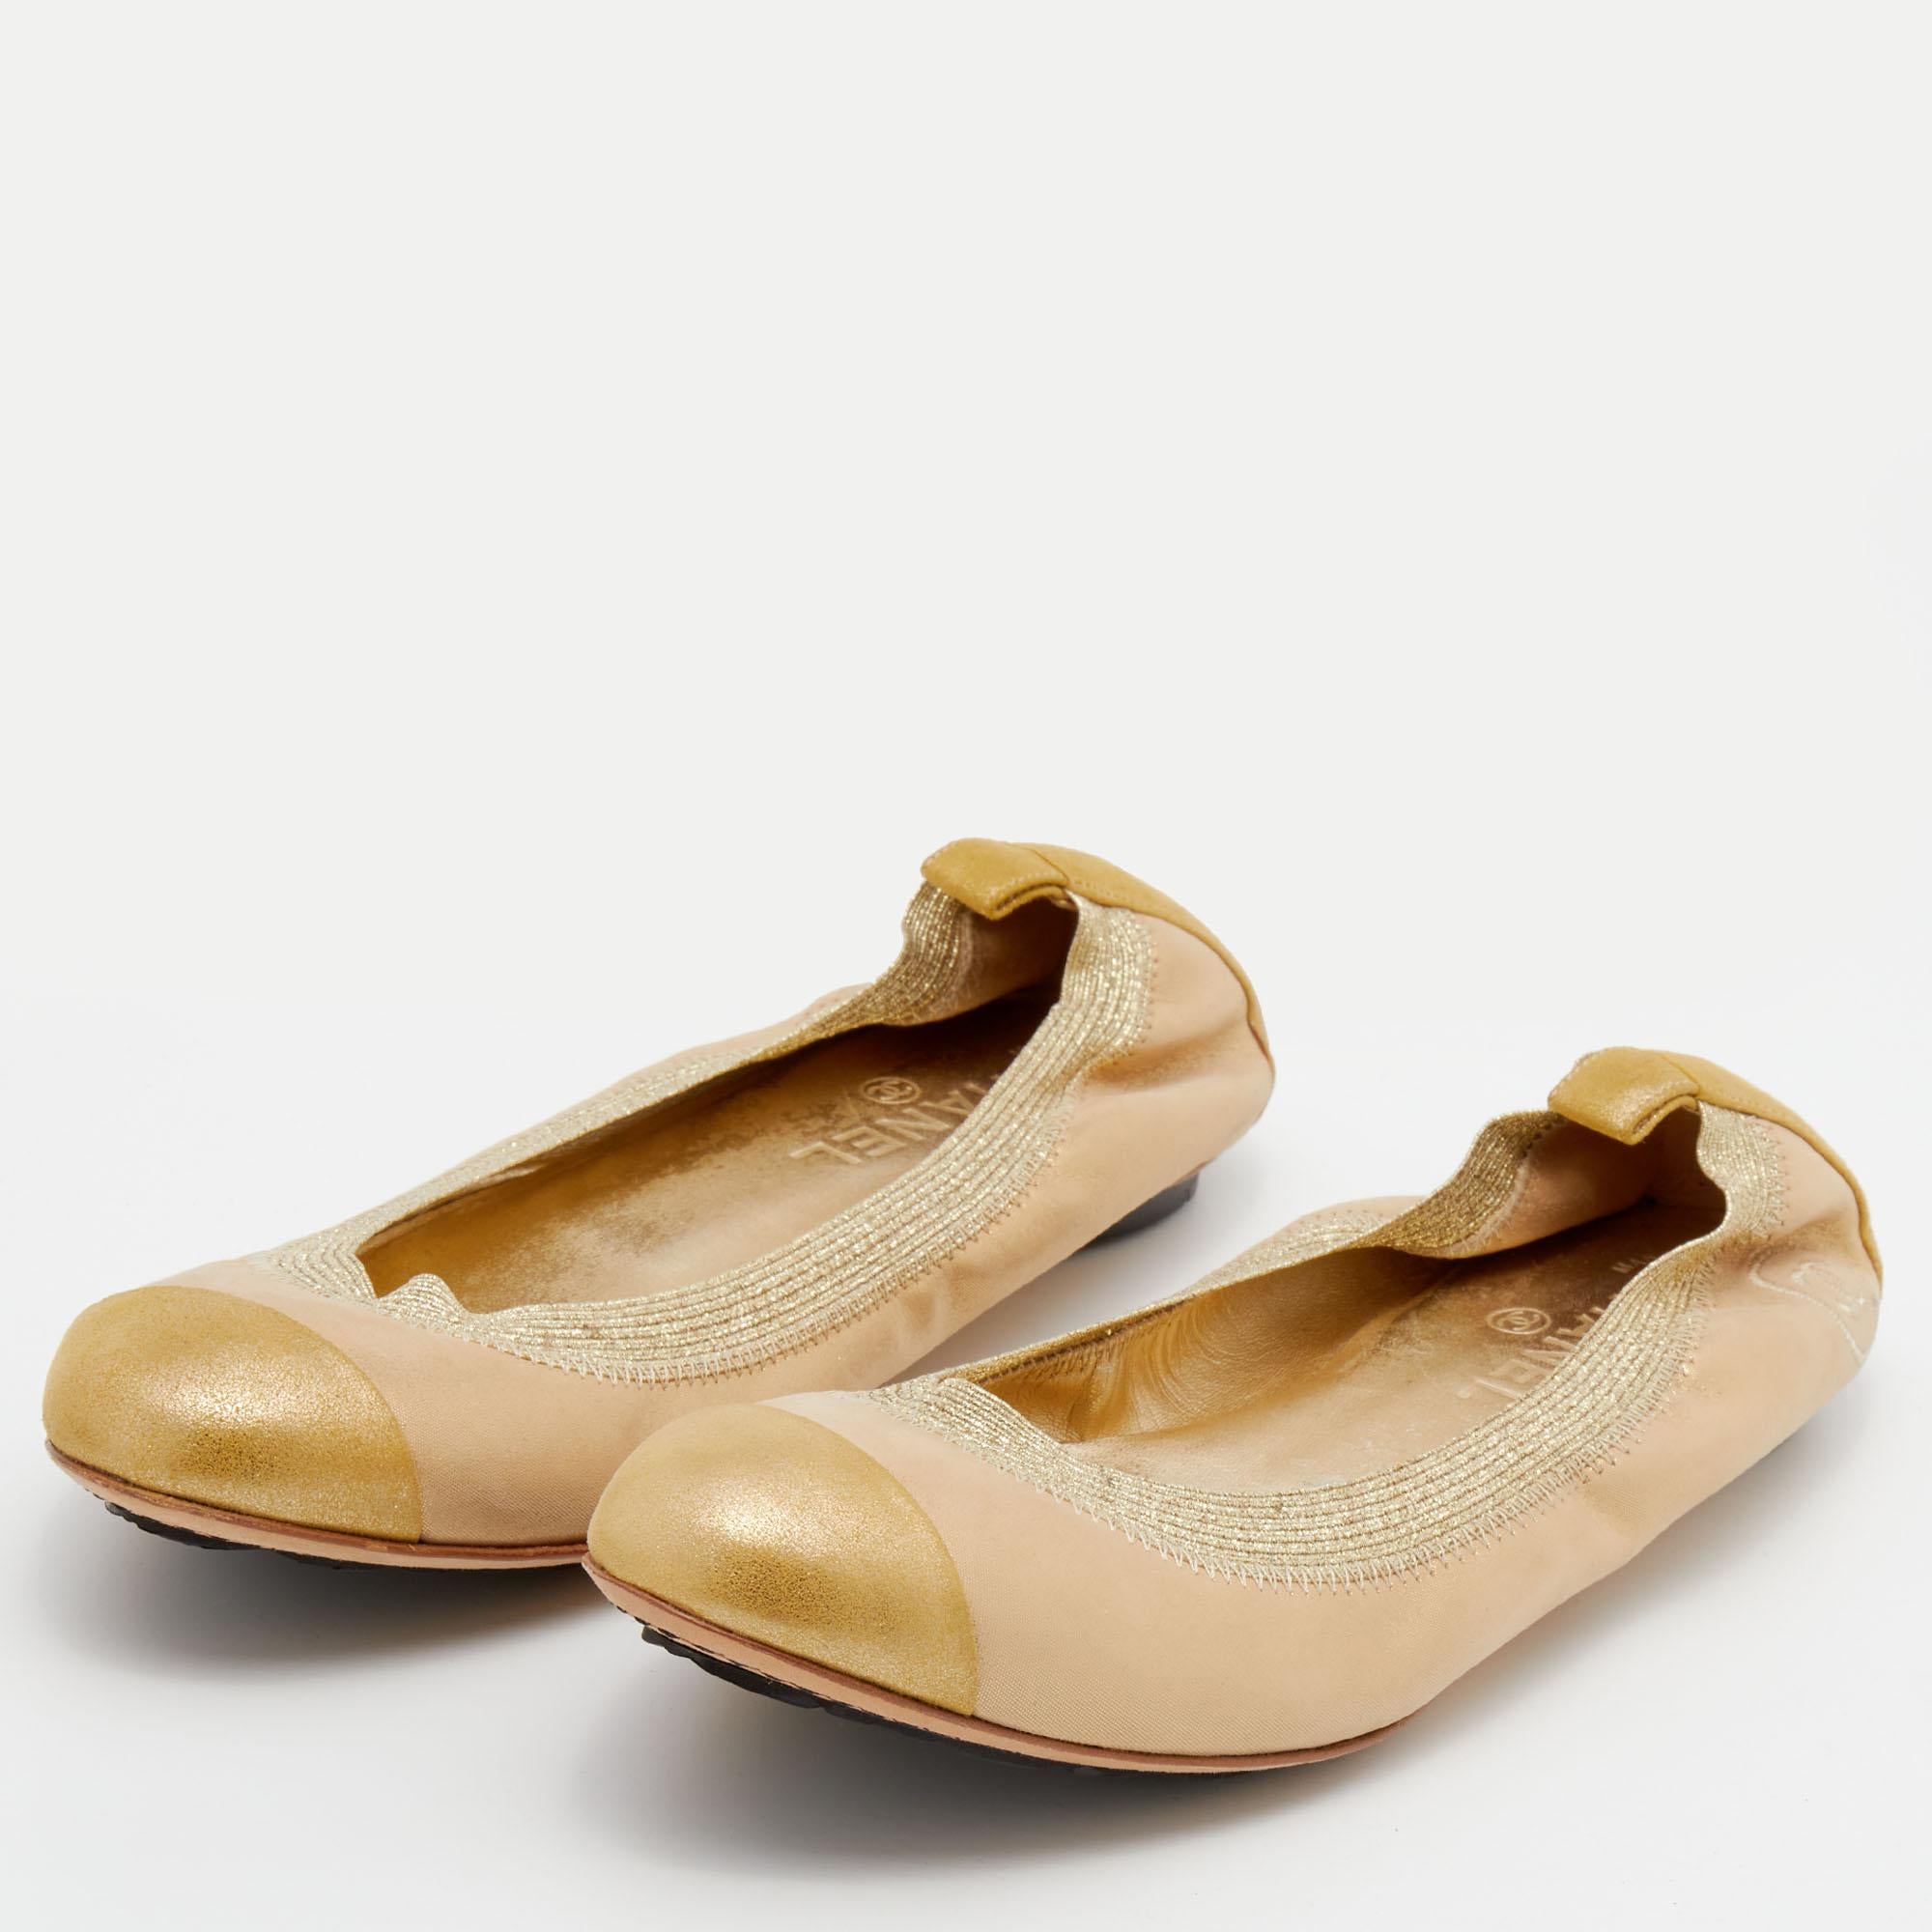 
The kind of shoes that you'll turn to time and again for varied occasions is ballet flats. They ride high on comfort and style and can be easily matched with all kinds of outfits. Hence, this pair from Chanel should be your next buy. They come in a